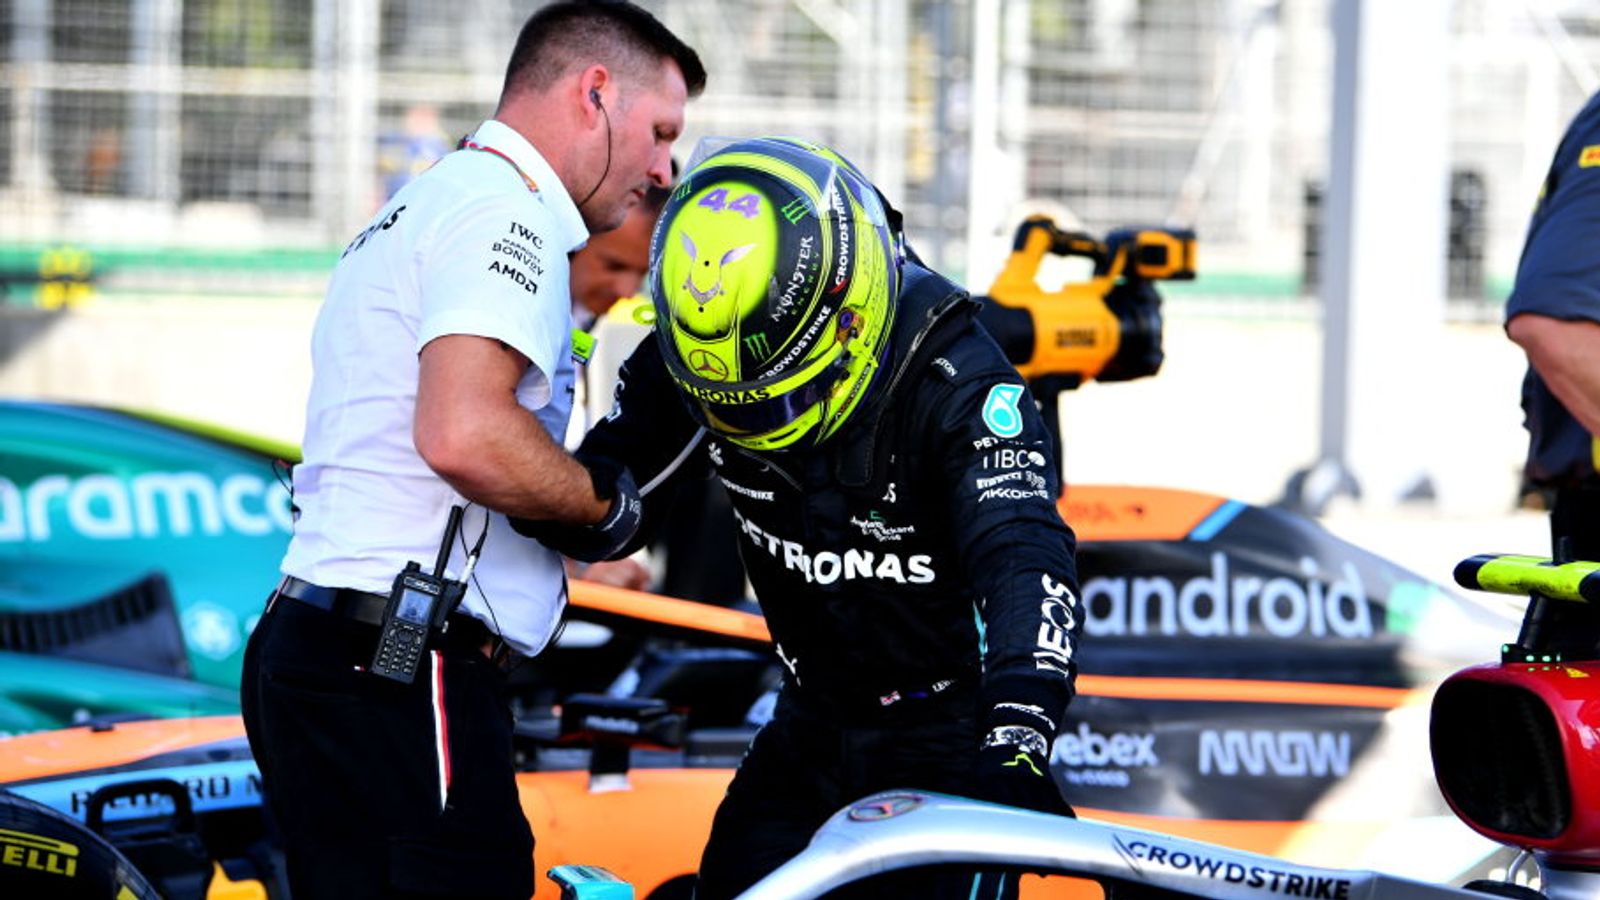 Lewis Hamilton: Toto Wolff says Mercedes driver is doubtful for Canadian GP with back injury as Christian Horner questions complaints